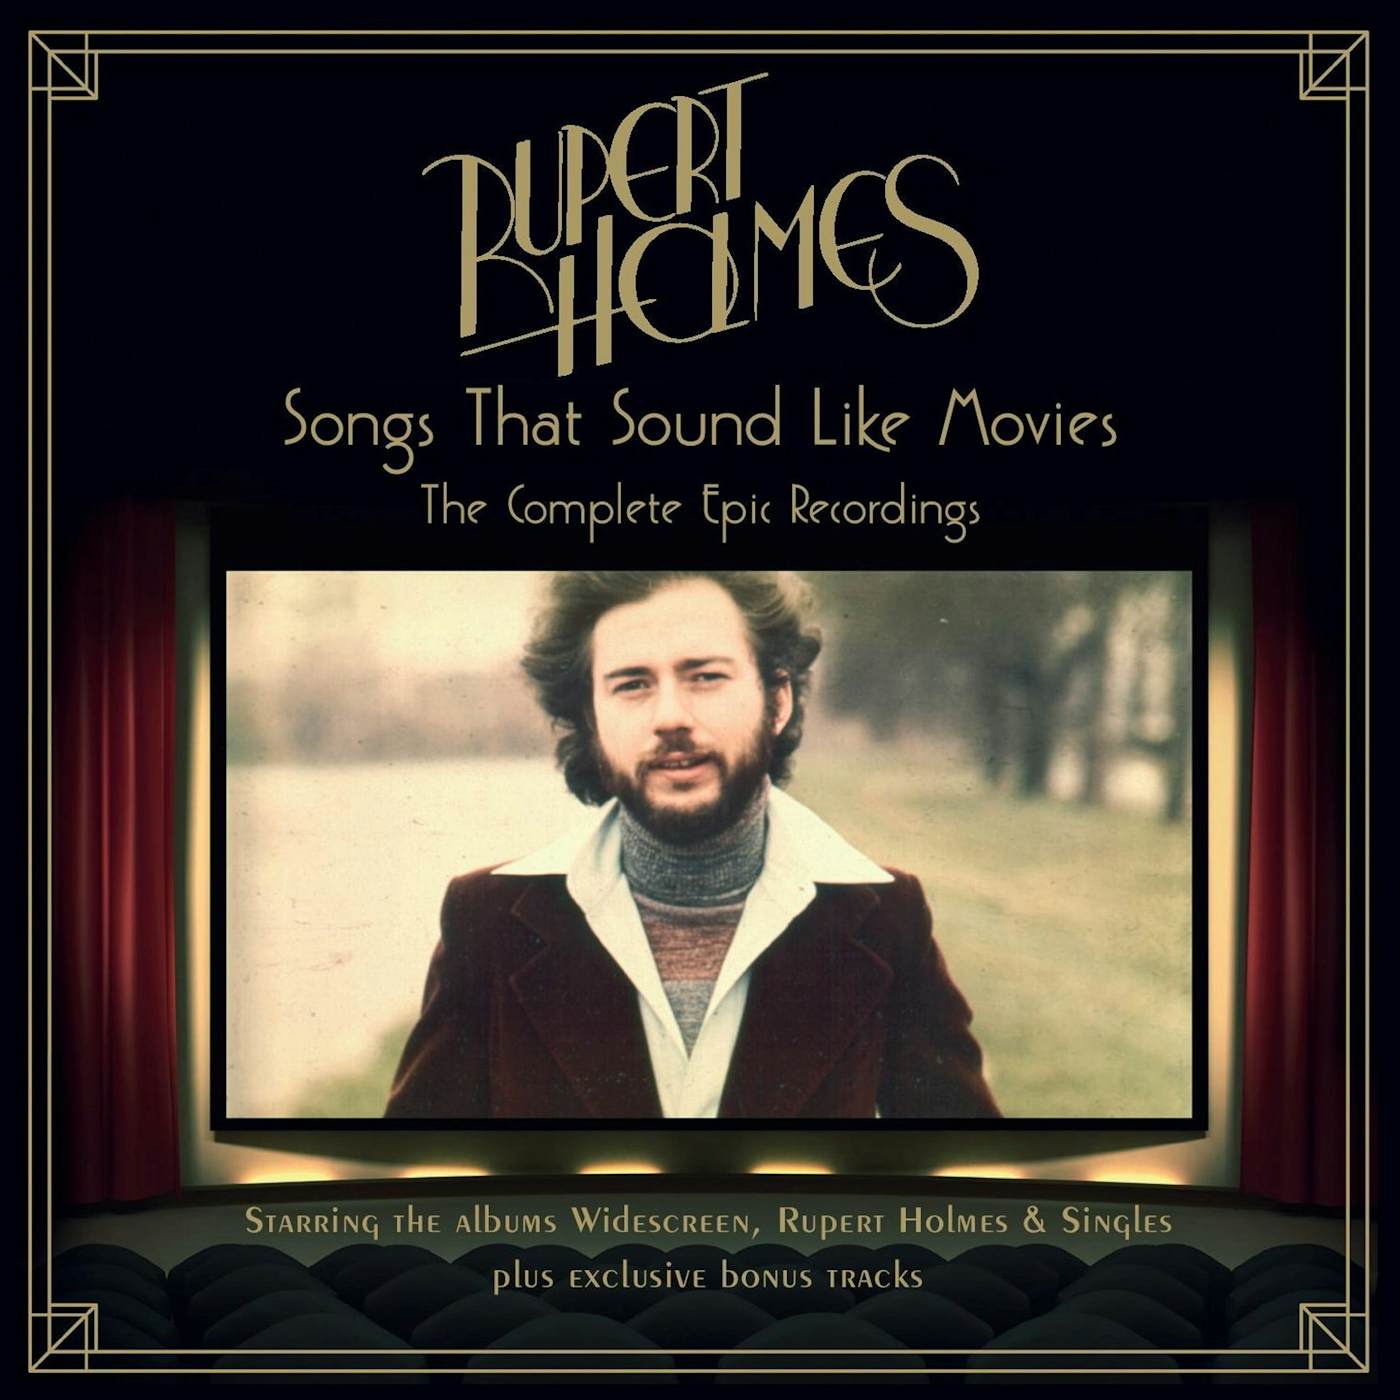 Rupert Holmes SONGS THAT SOUND LIKE MOVIES: COMP EPIC RECORDINGS CD